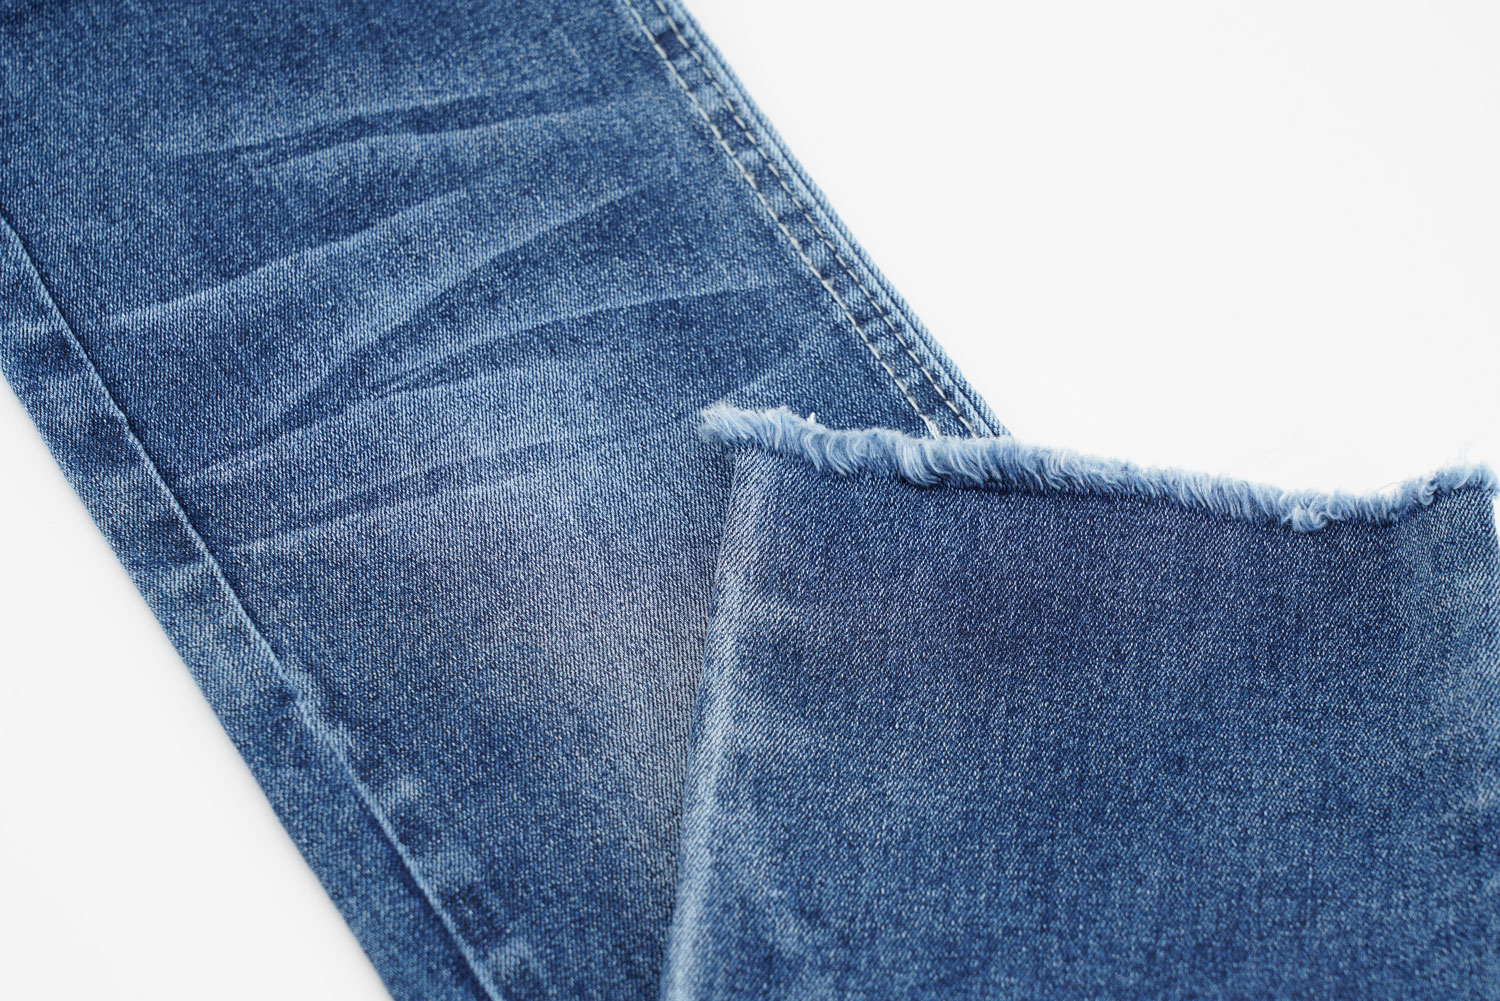 A Simple Way to Have the Best High Stretch Denim Fabric Options 2